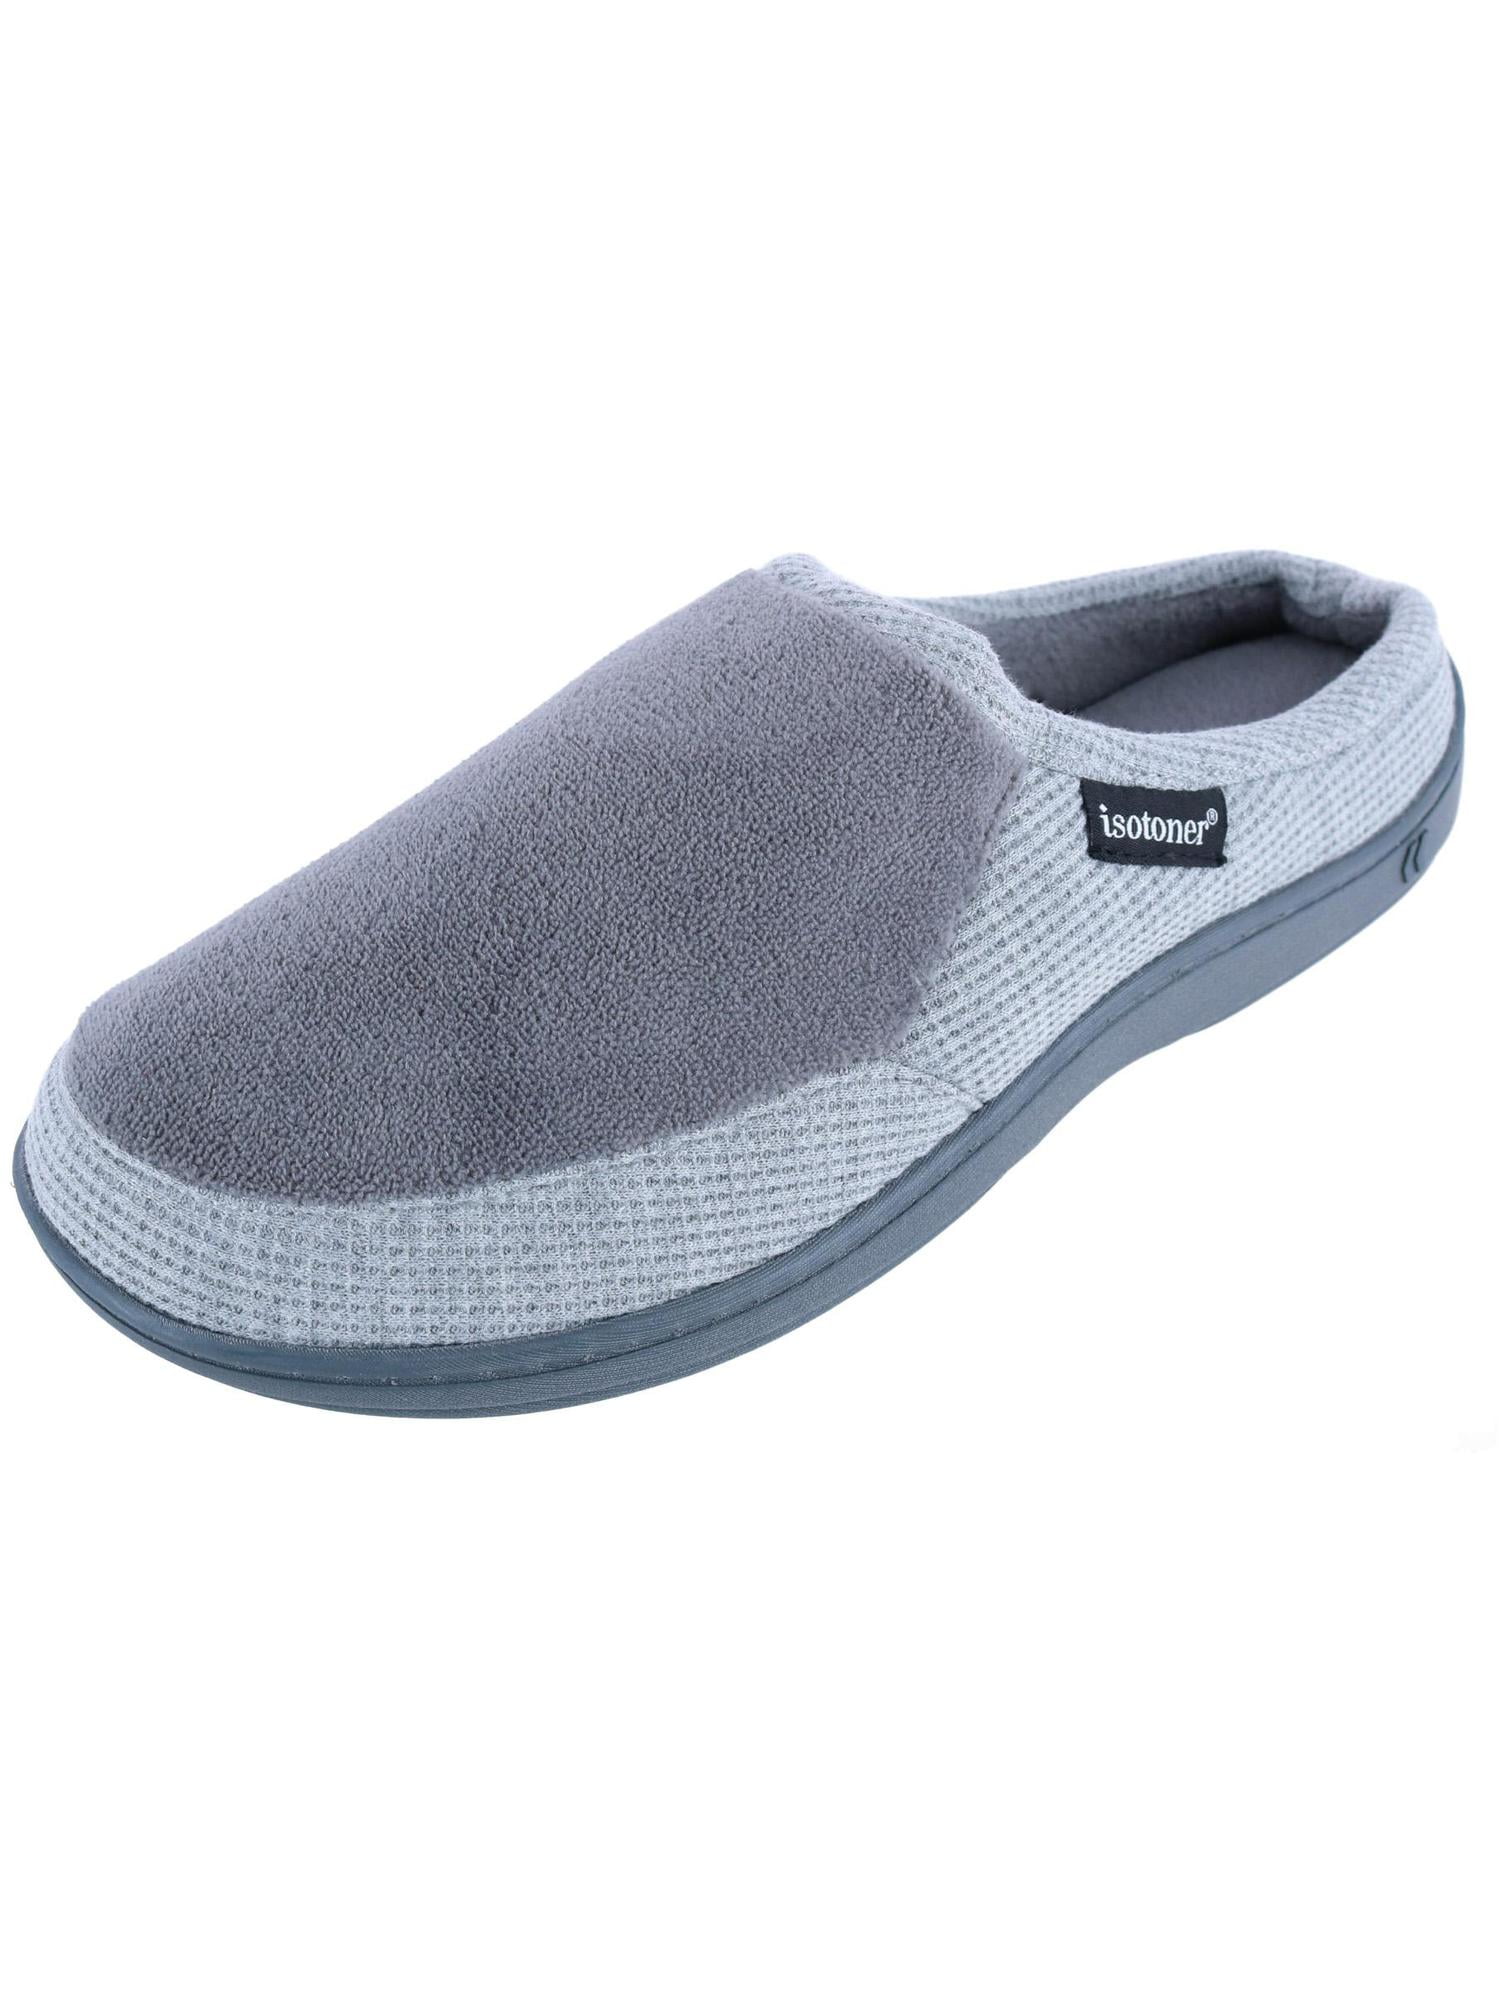 NEW Sizes Multiple Colors Isotoner Men's Microterry Slip On Slippers 